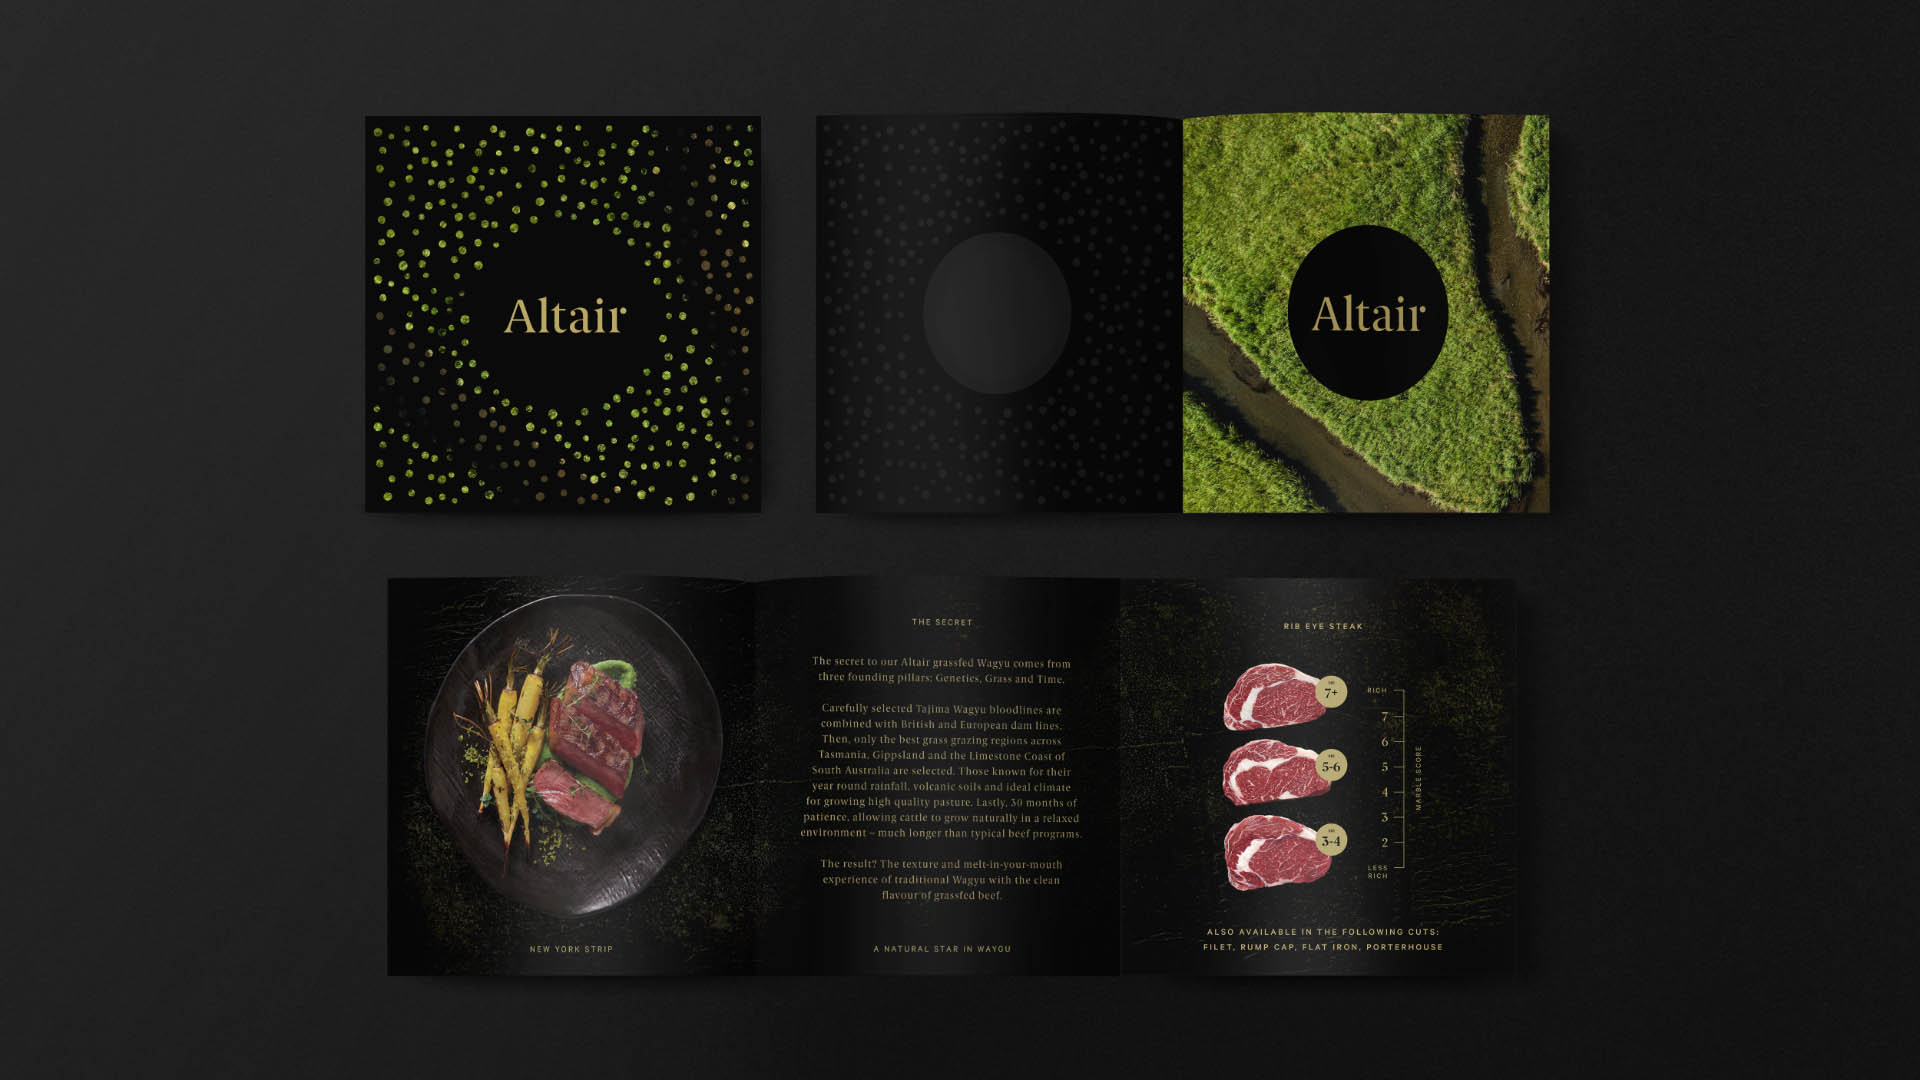 Three images of Altair's printed brochure, its front cover, and inside spreads.